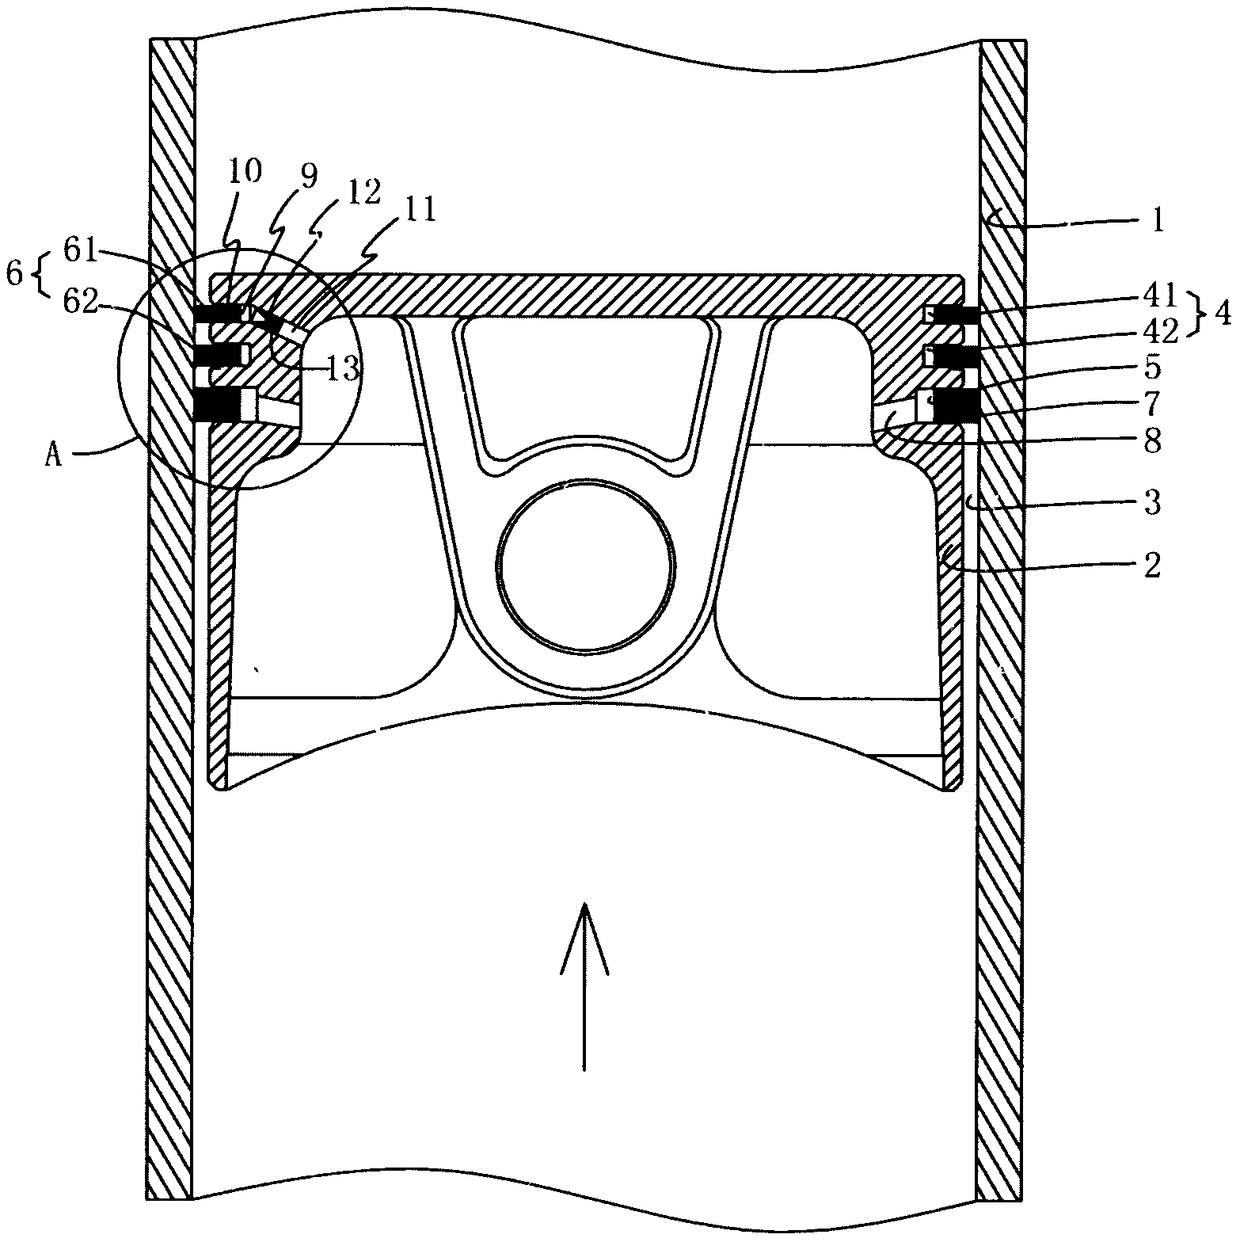 A built-in anti-channeling oil piston structure